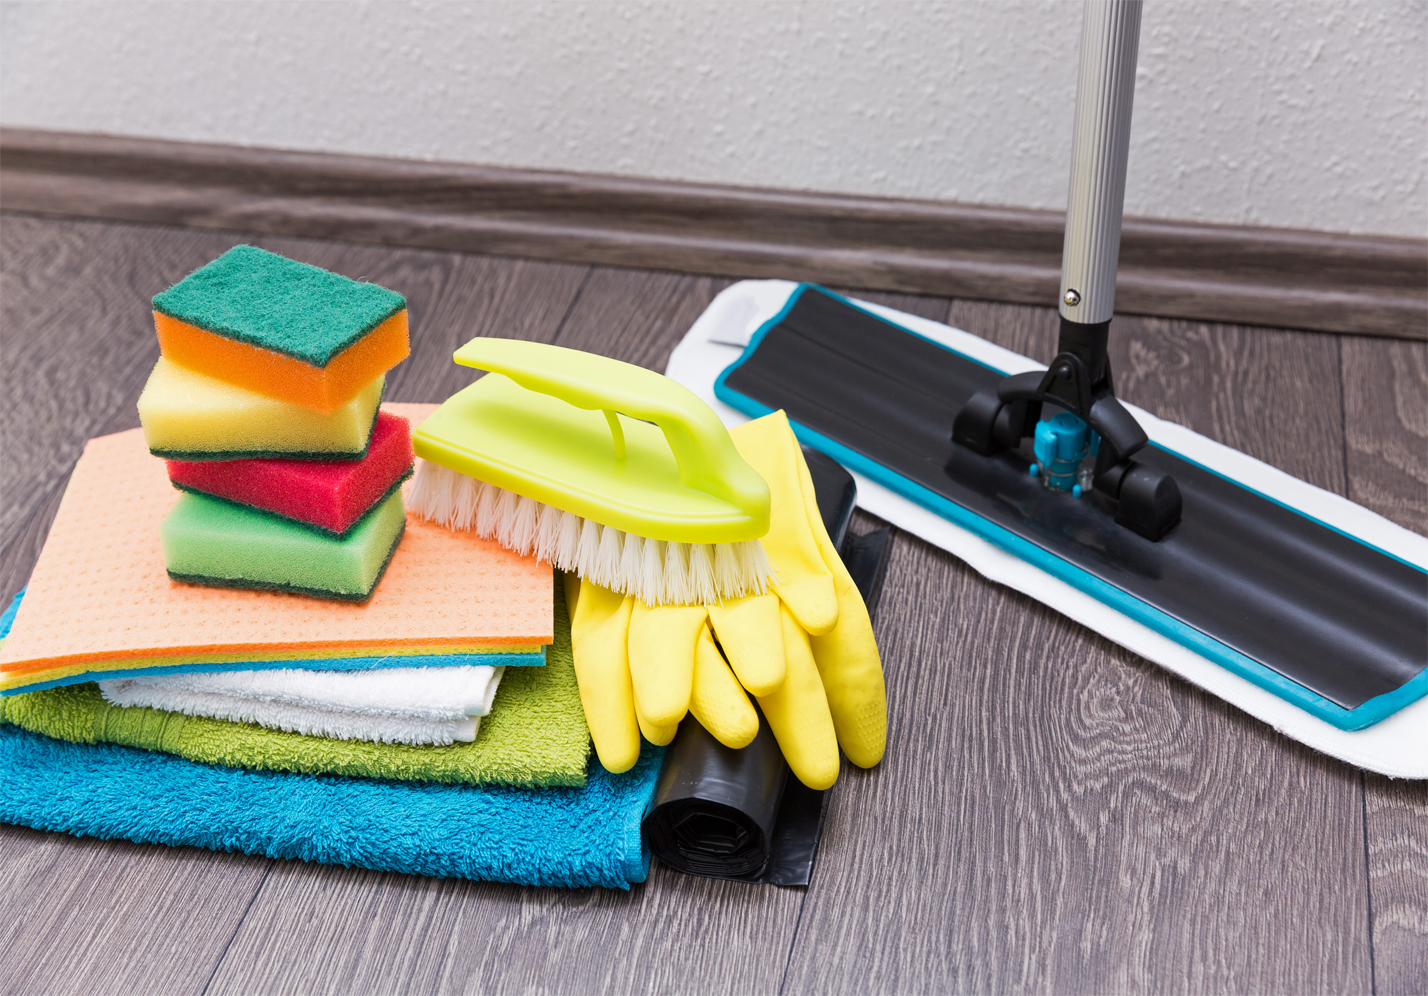 Greenwich Maids, LLC - Daily Tidy Services